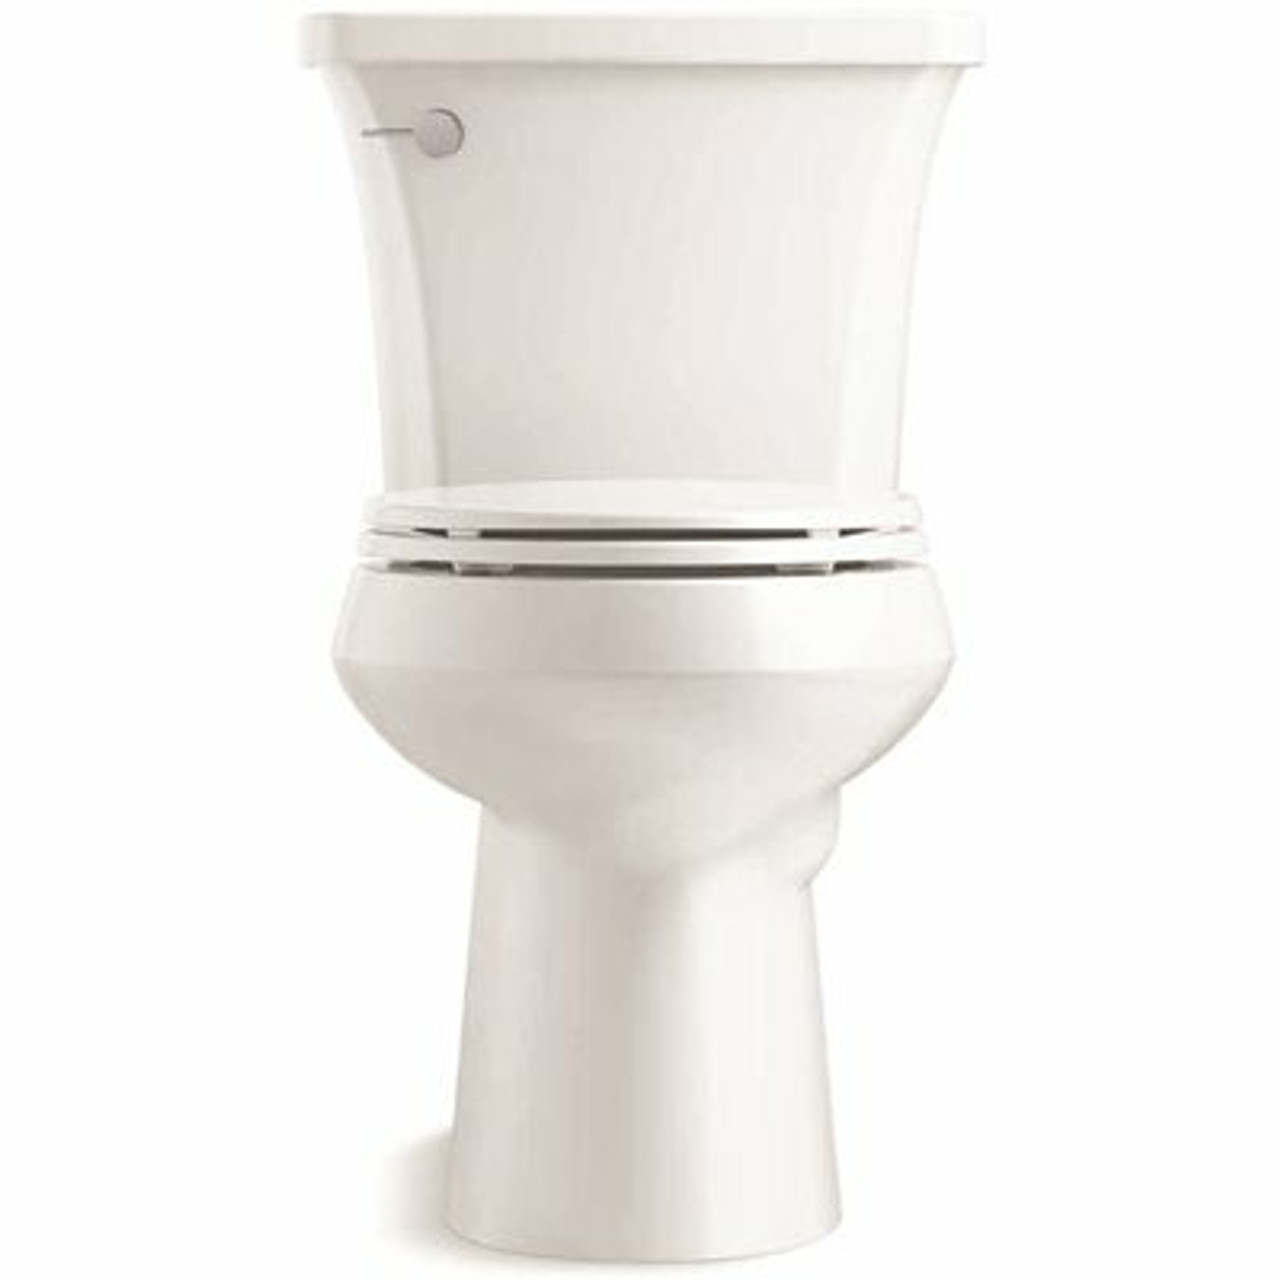 Kohler Highline Arc The Complete Solution 2-Piece 1.28 Gpf Single Flush Elongated Toilet In White (Slow-Close Seat Included)